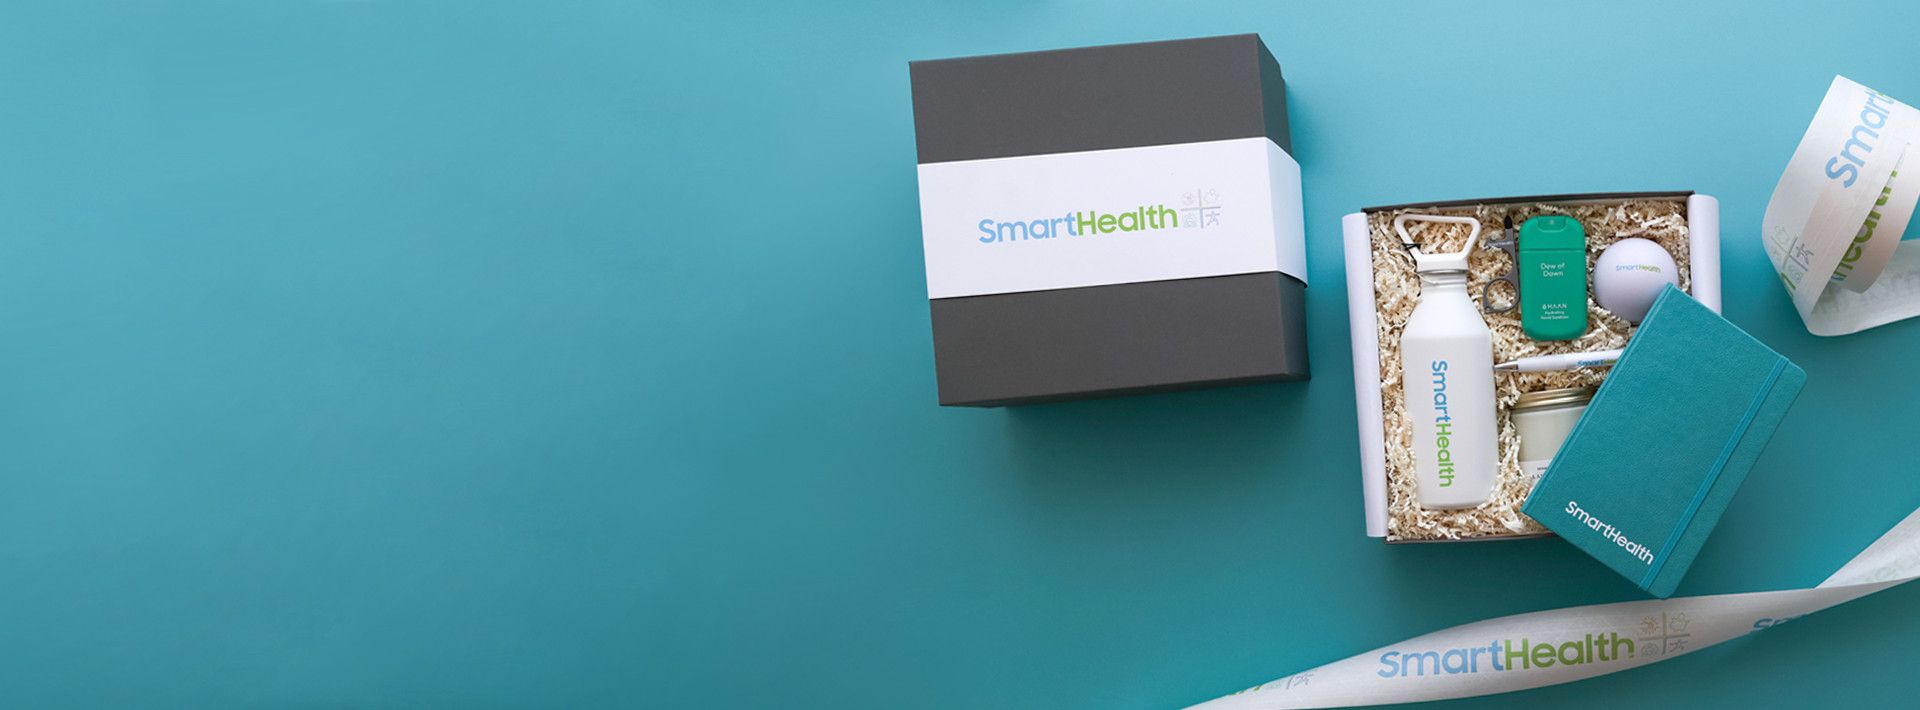 smarthealth branded box on teal background